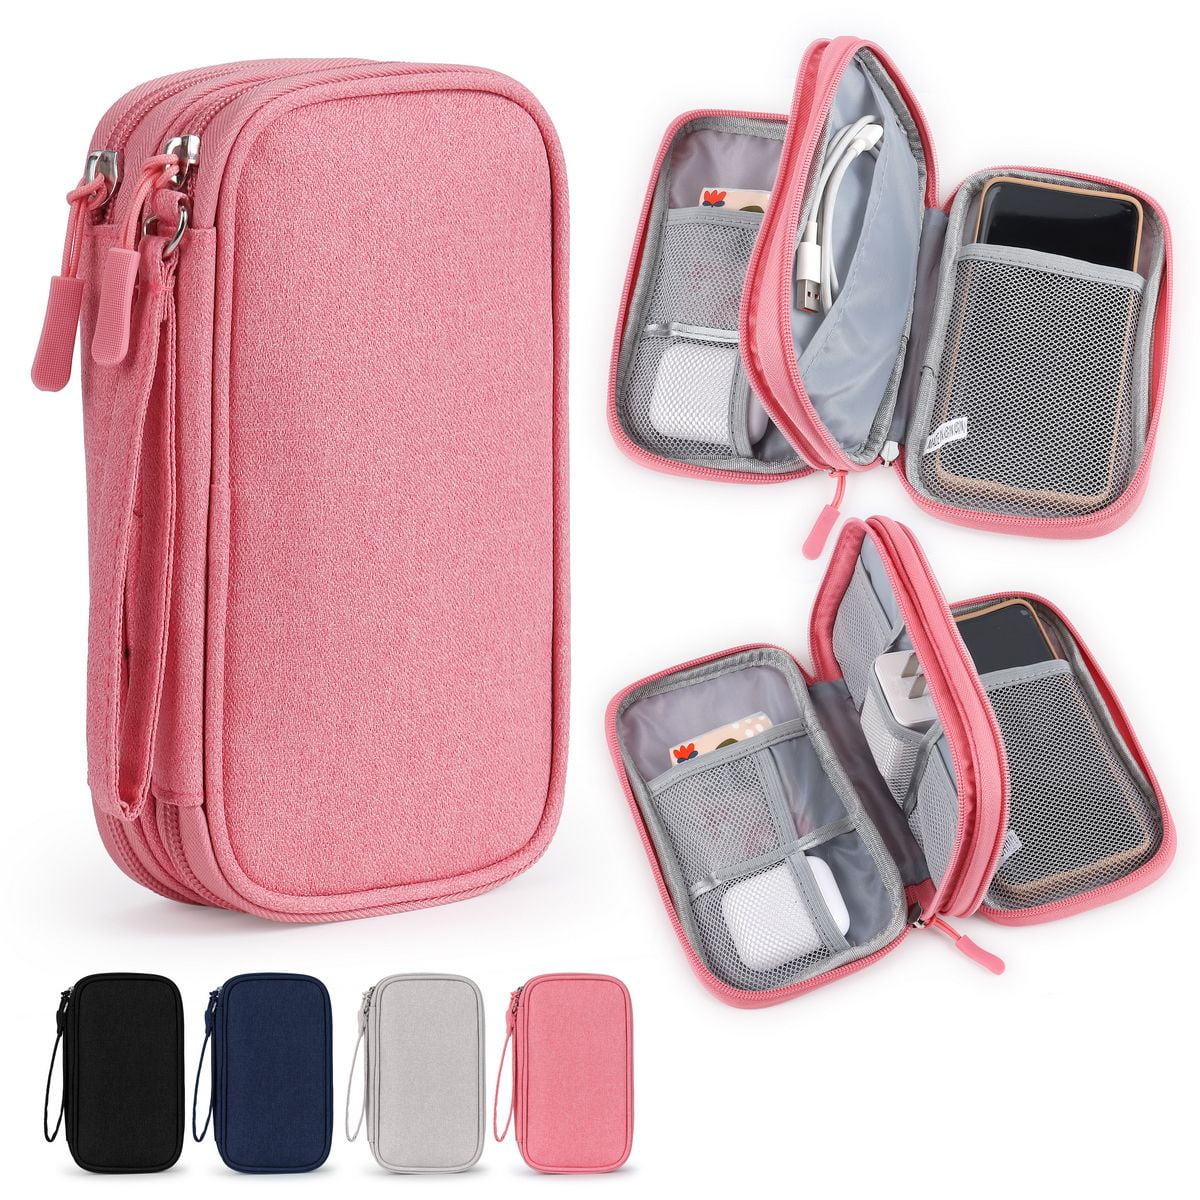 Electronics Travel Organizer, Small Waterproof Tech Accessories Pouch Bag